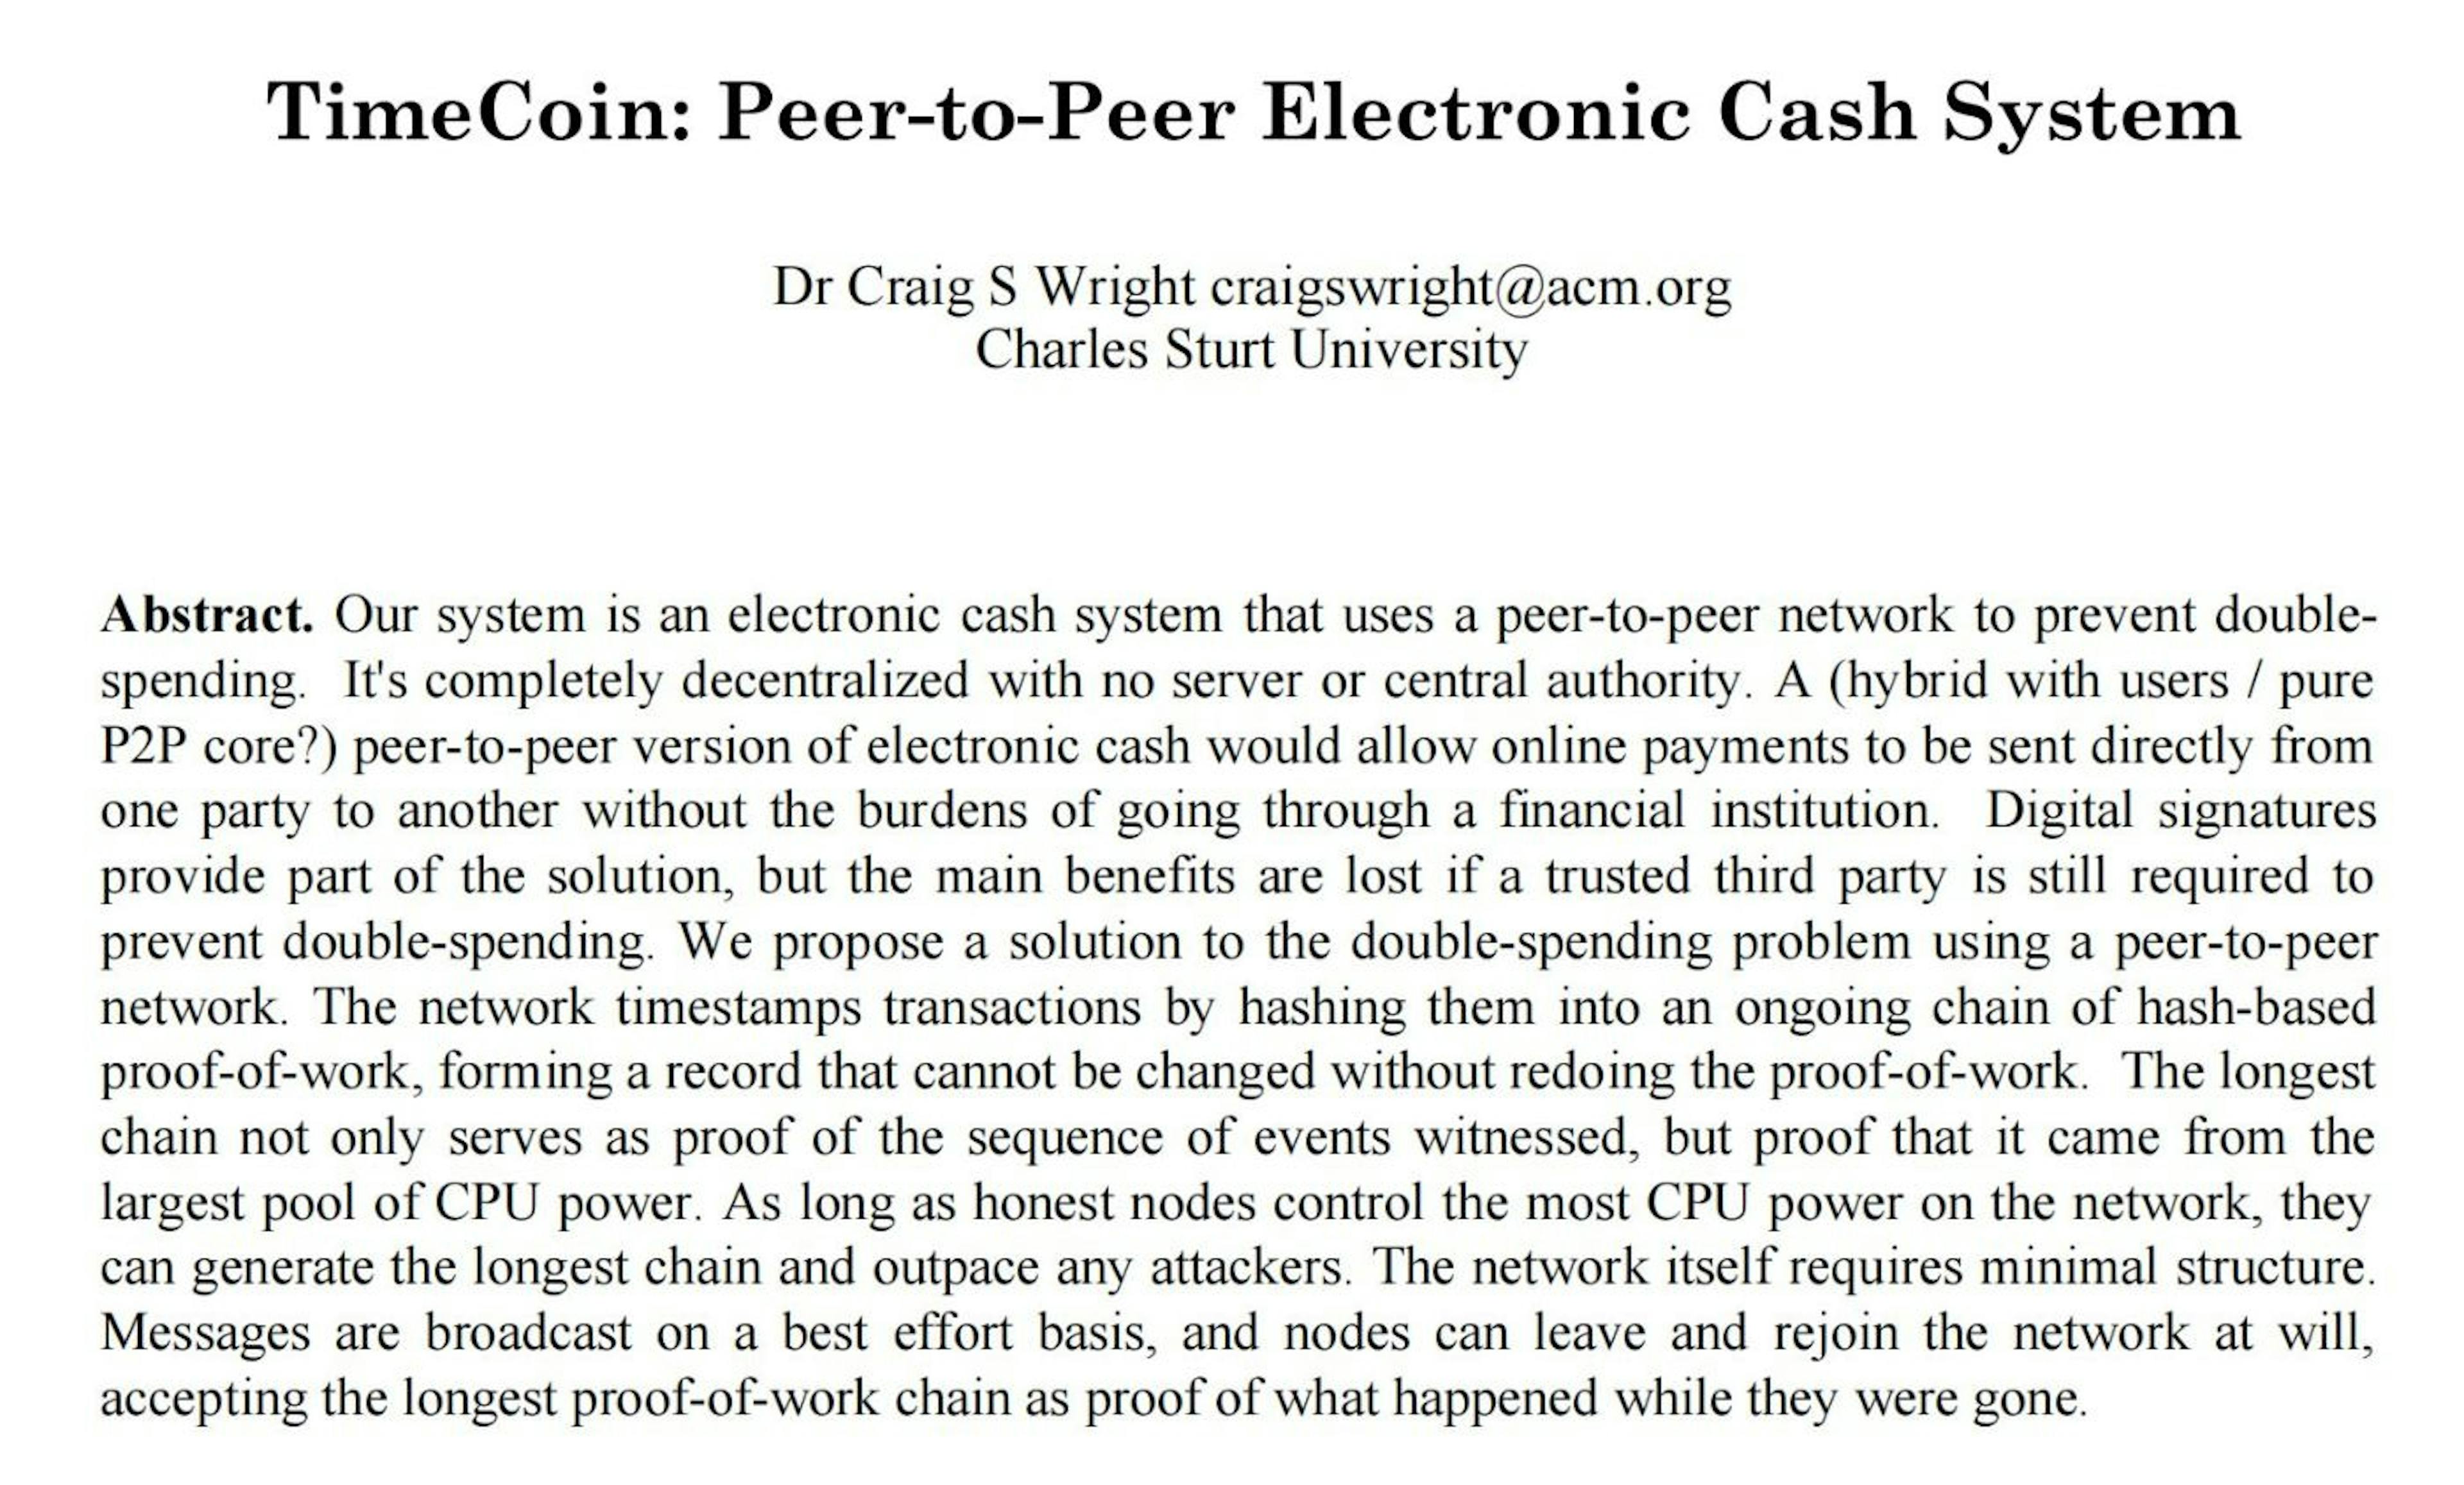 In 2019, Craig Wright takes the publicly available 2009 PDF version of the Bitcoin whitepaper from bitcoin.org and tries altering it, to give it an appearance of an early 2008 Bitcoin whitepaper draft. Part of his forging process is changing Bitcoin to TimeCoin (lol), and sloppily adjusting the metadata of the original PDF file.